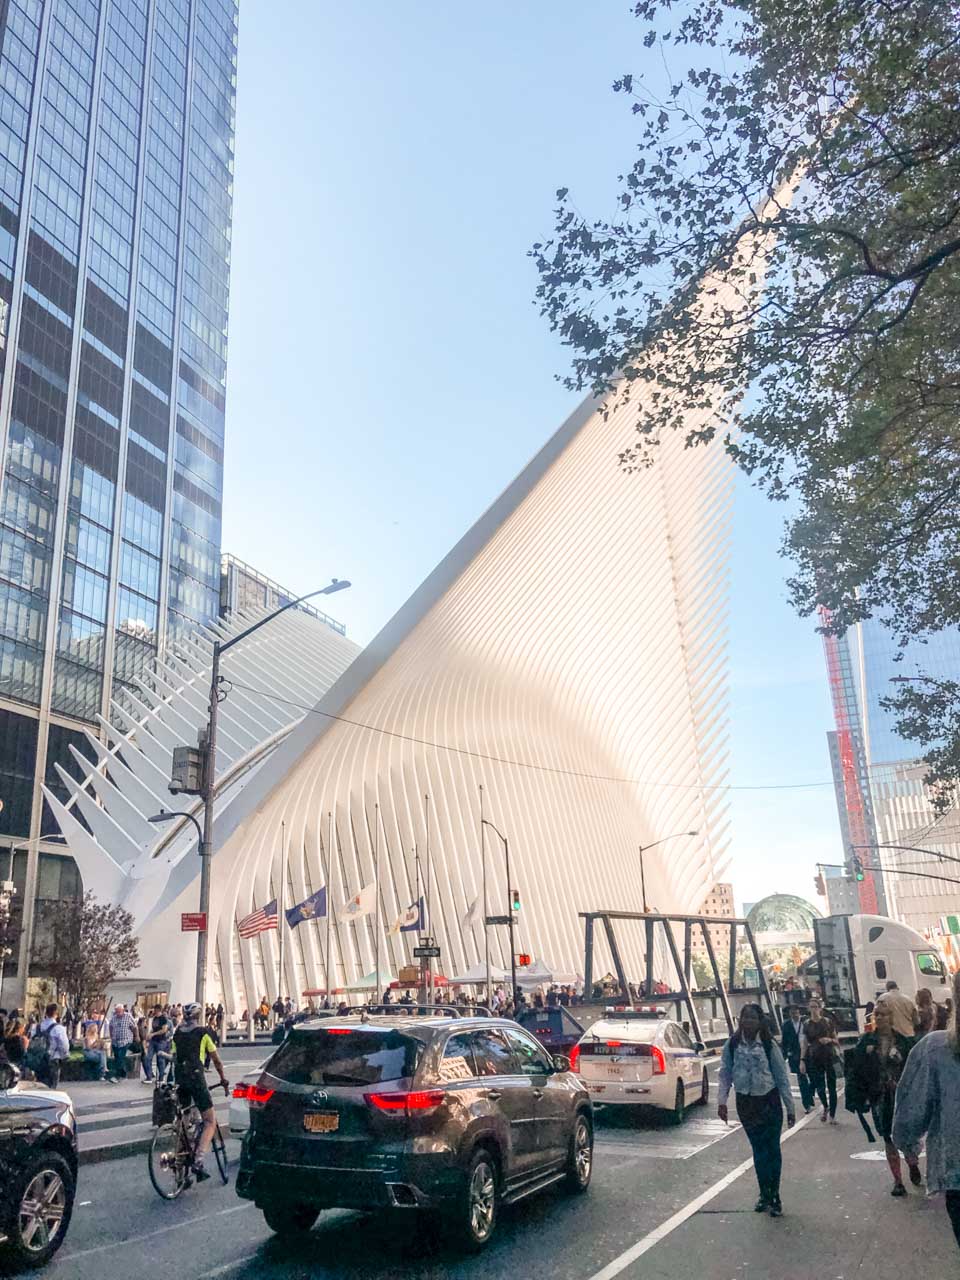 The outside of the Oculus station in New York City